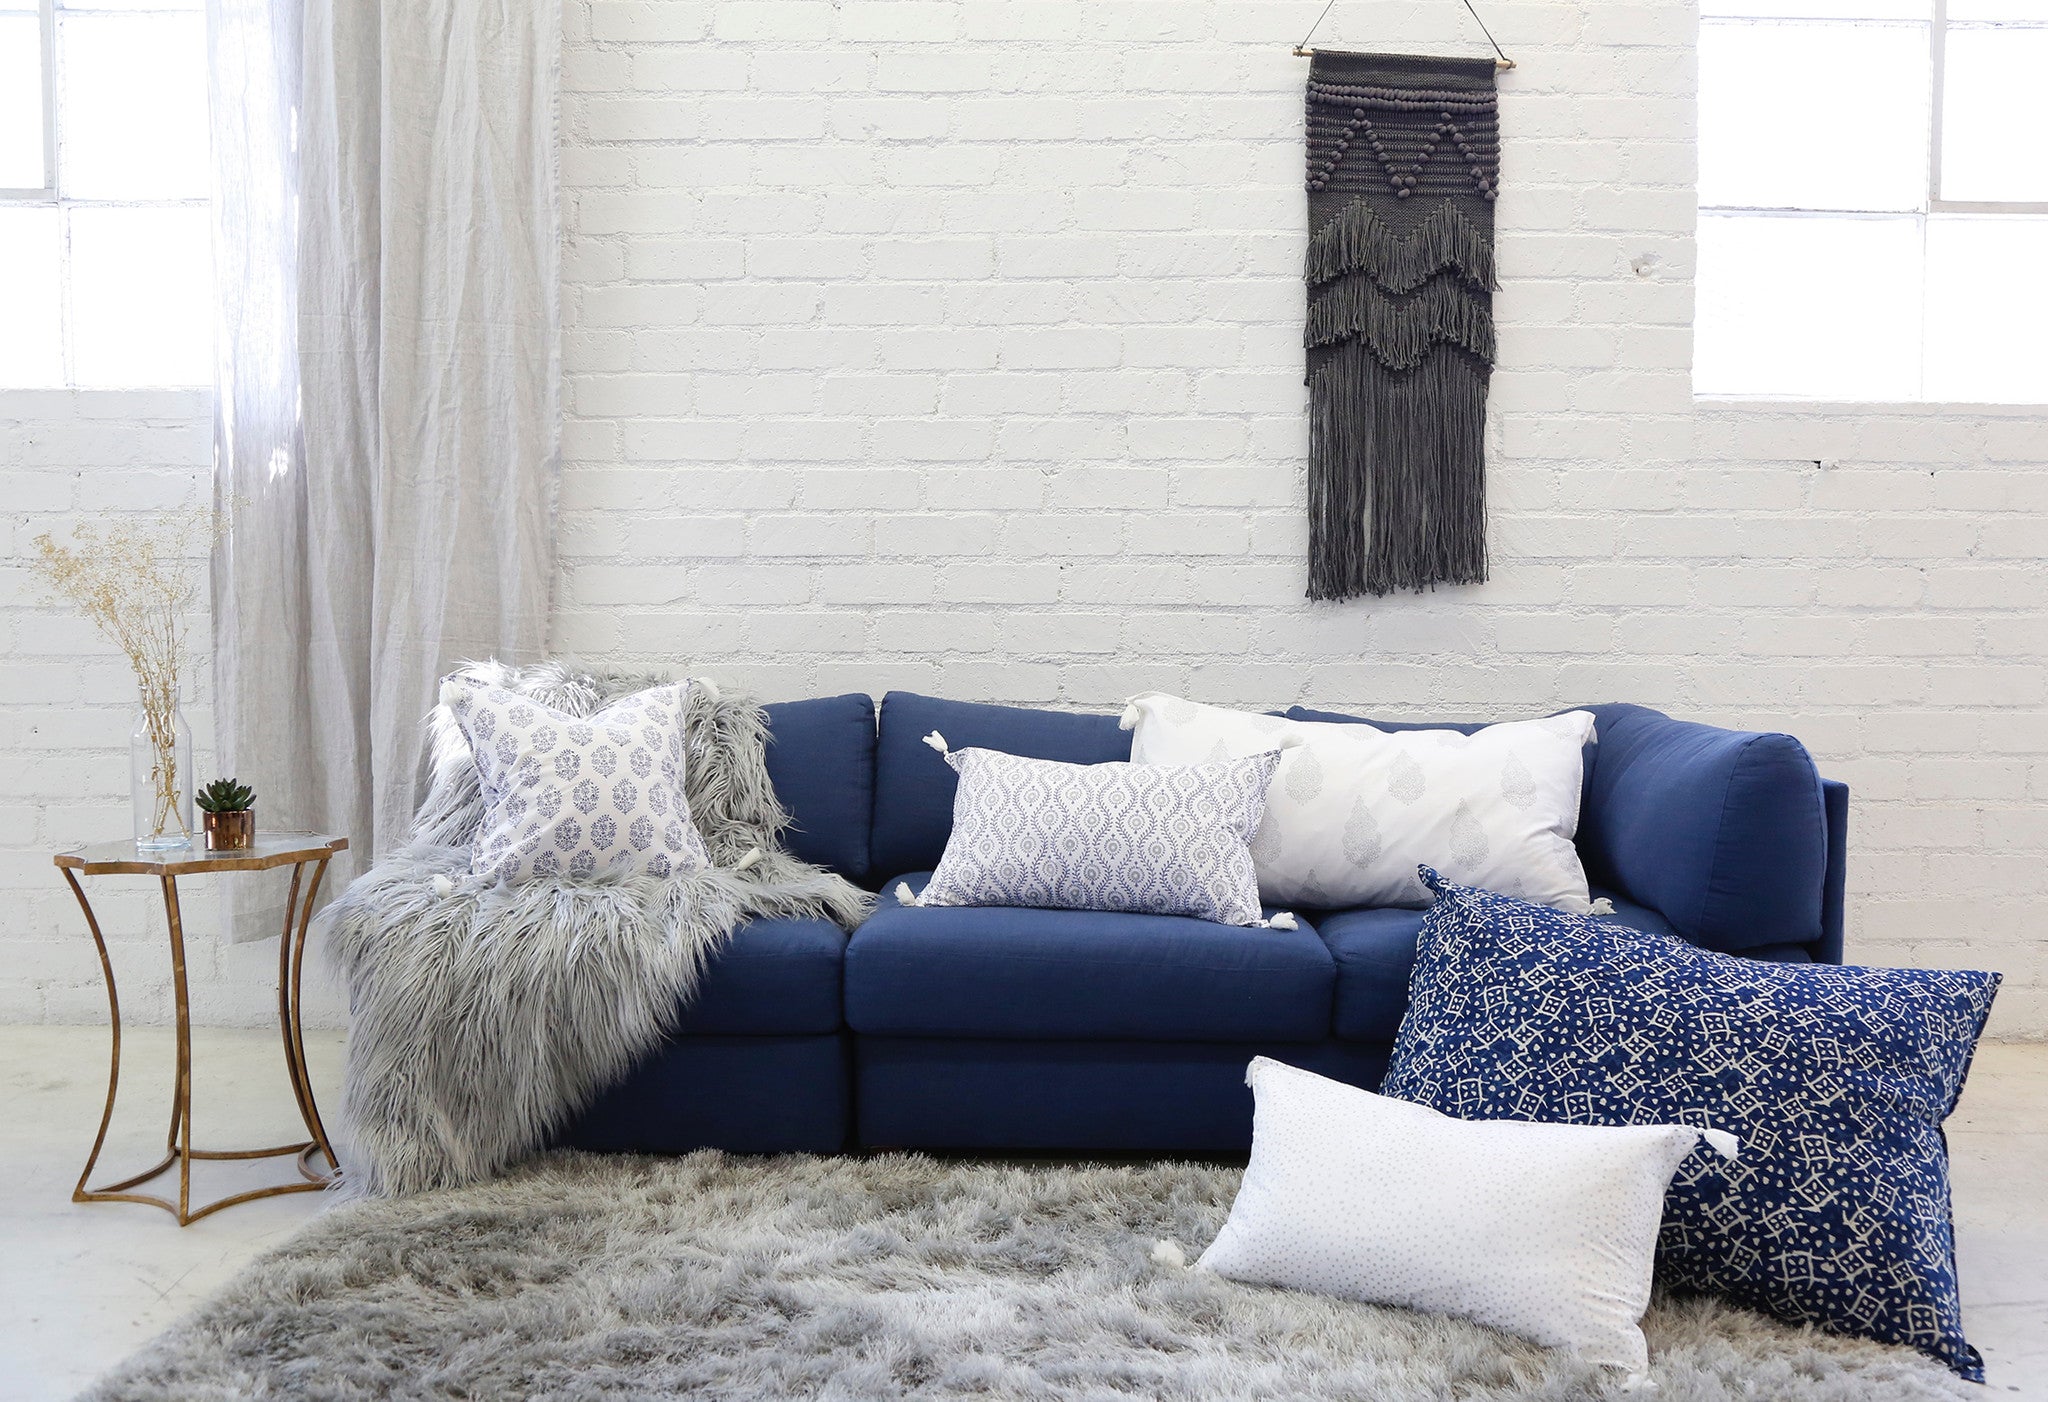 Get the Look!  Hand Blocked Pillows Have Arrived! 